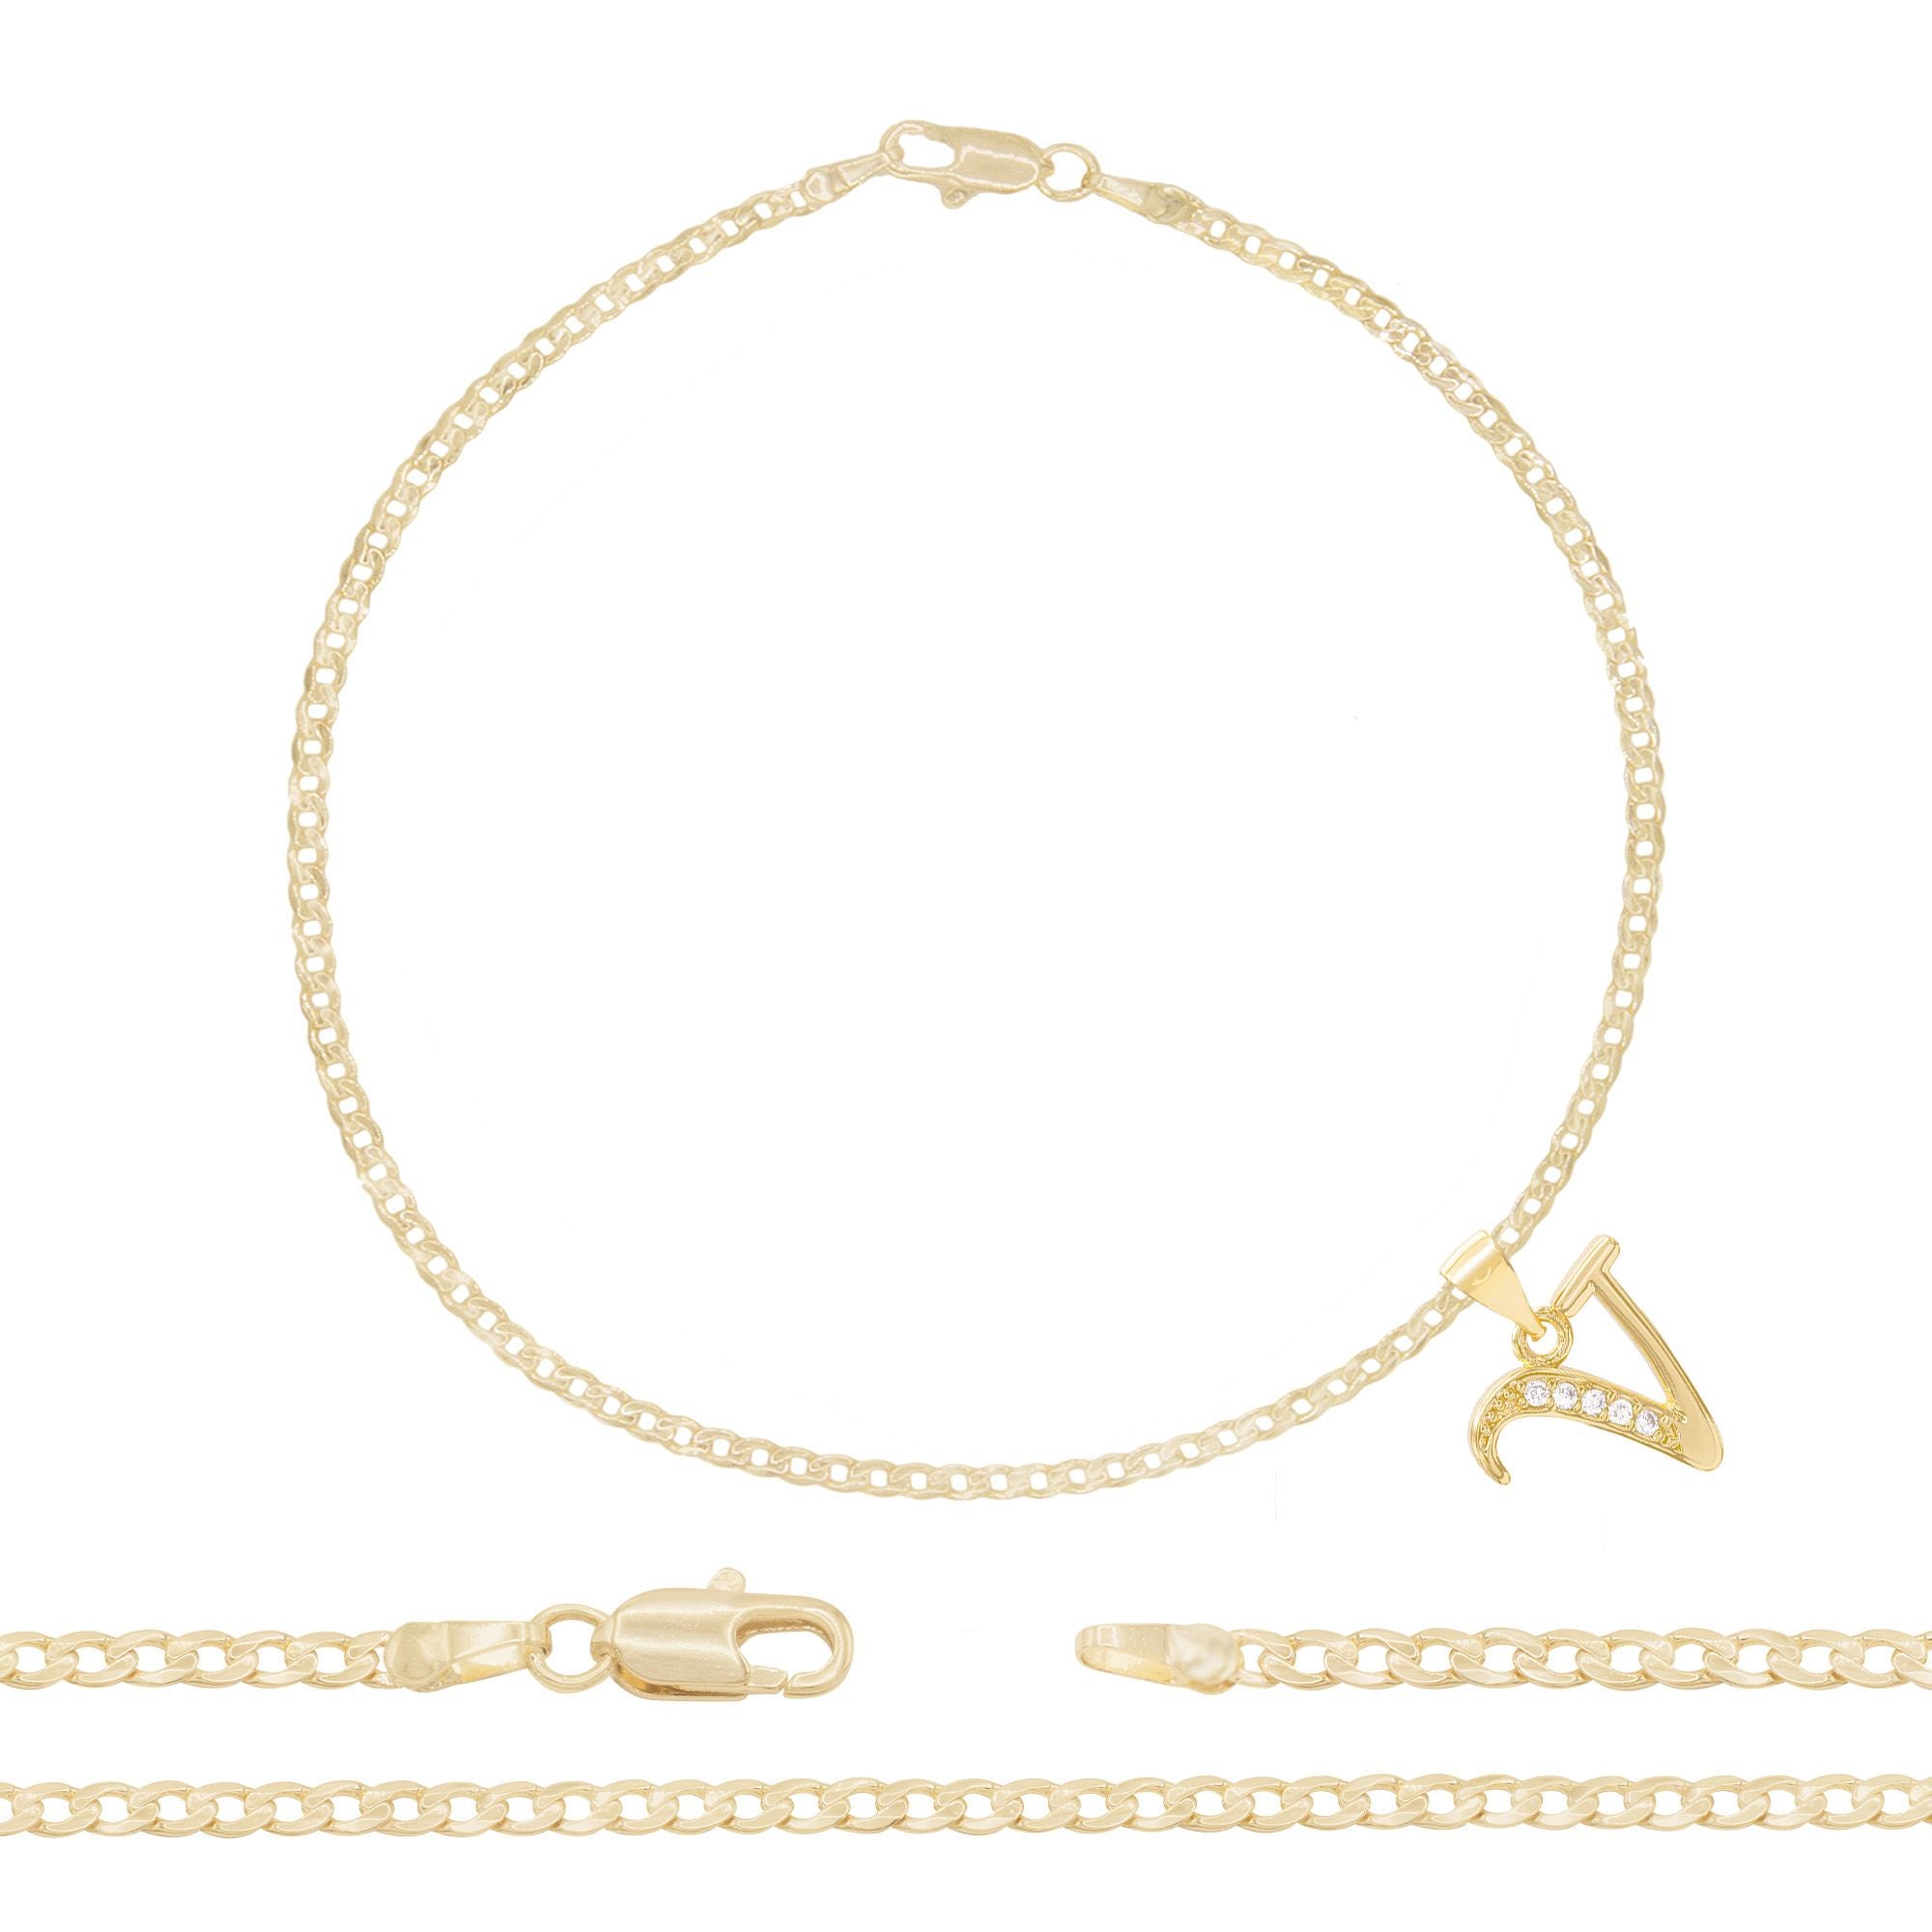 A-Z Initial Letter Pendant 14K Gold Filled Cubic Zirconia Curb Chain Anklet 10" Set 2.5 mm  Women Jewelry